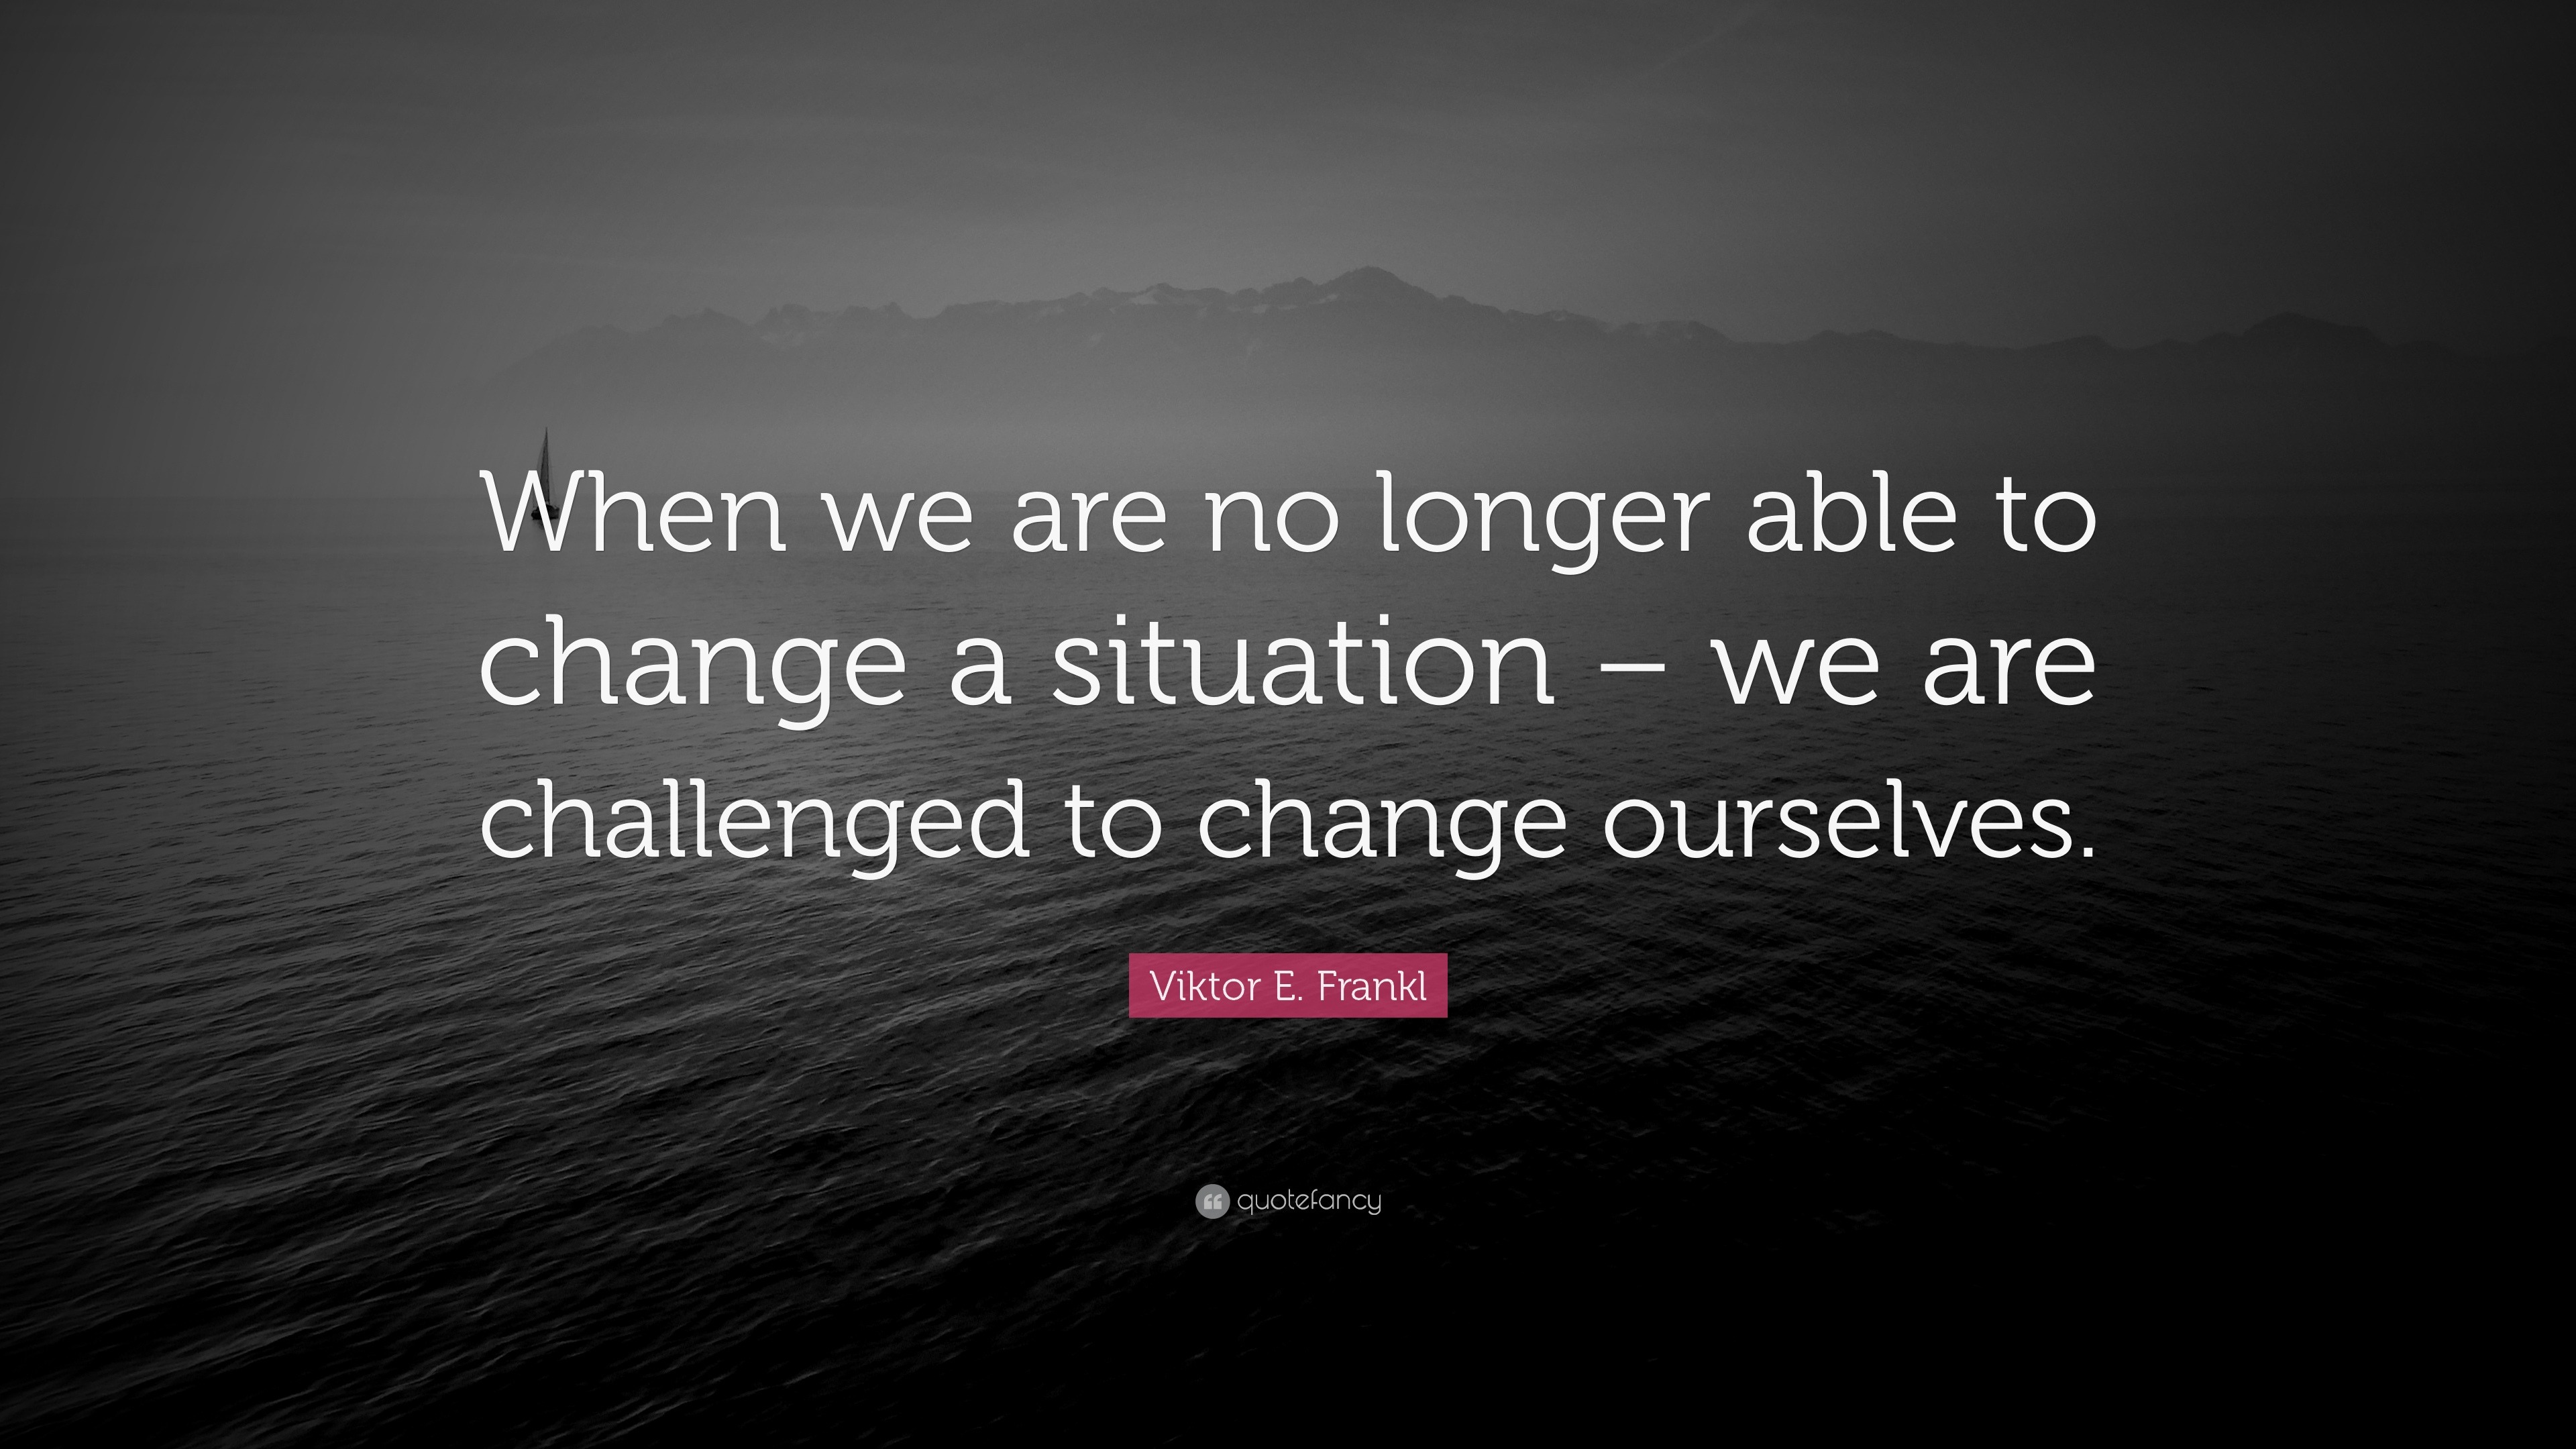 Viktor E. Frankl Quote: “When we are no longer able to change a